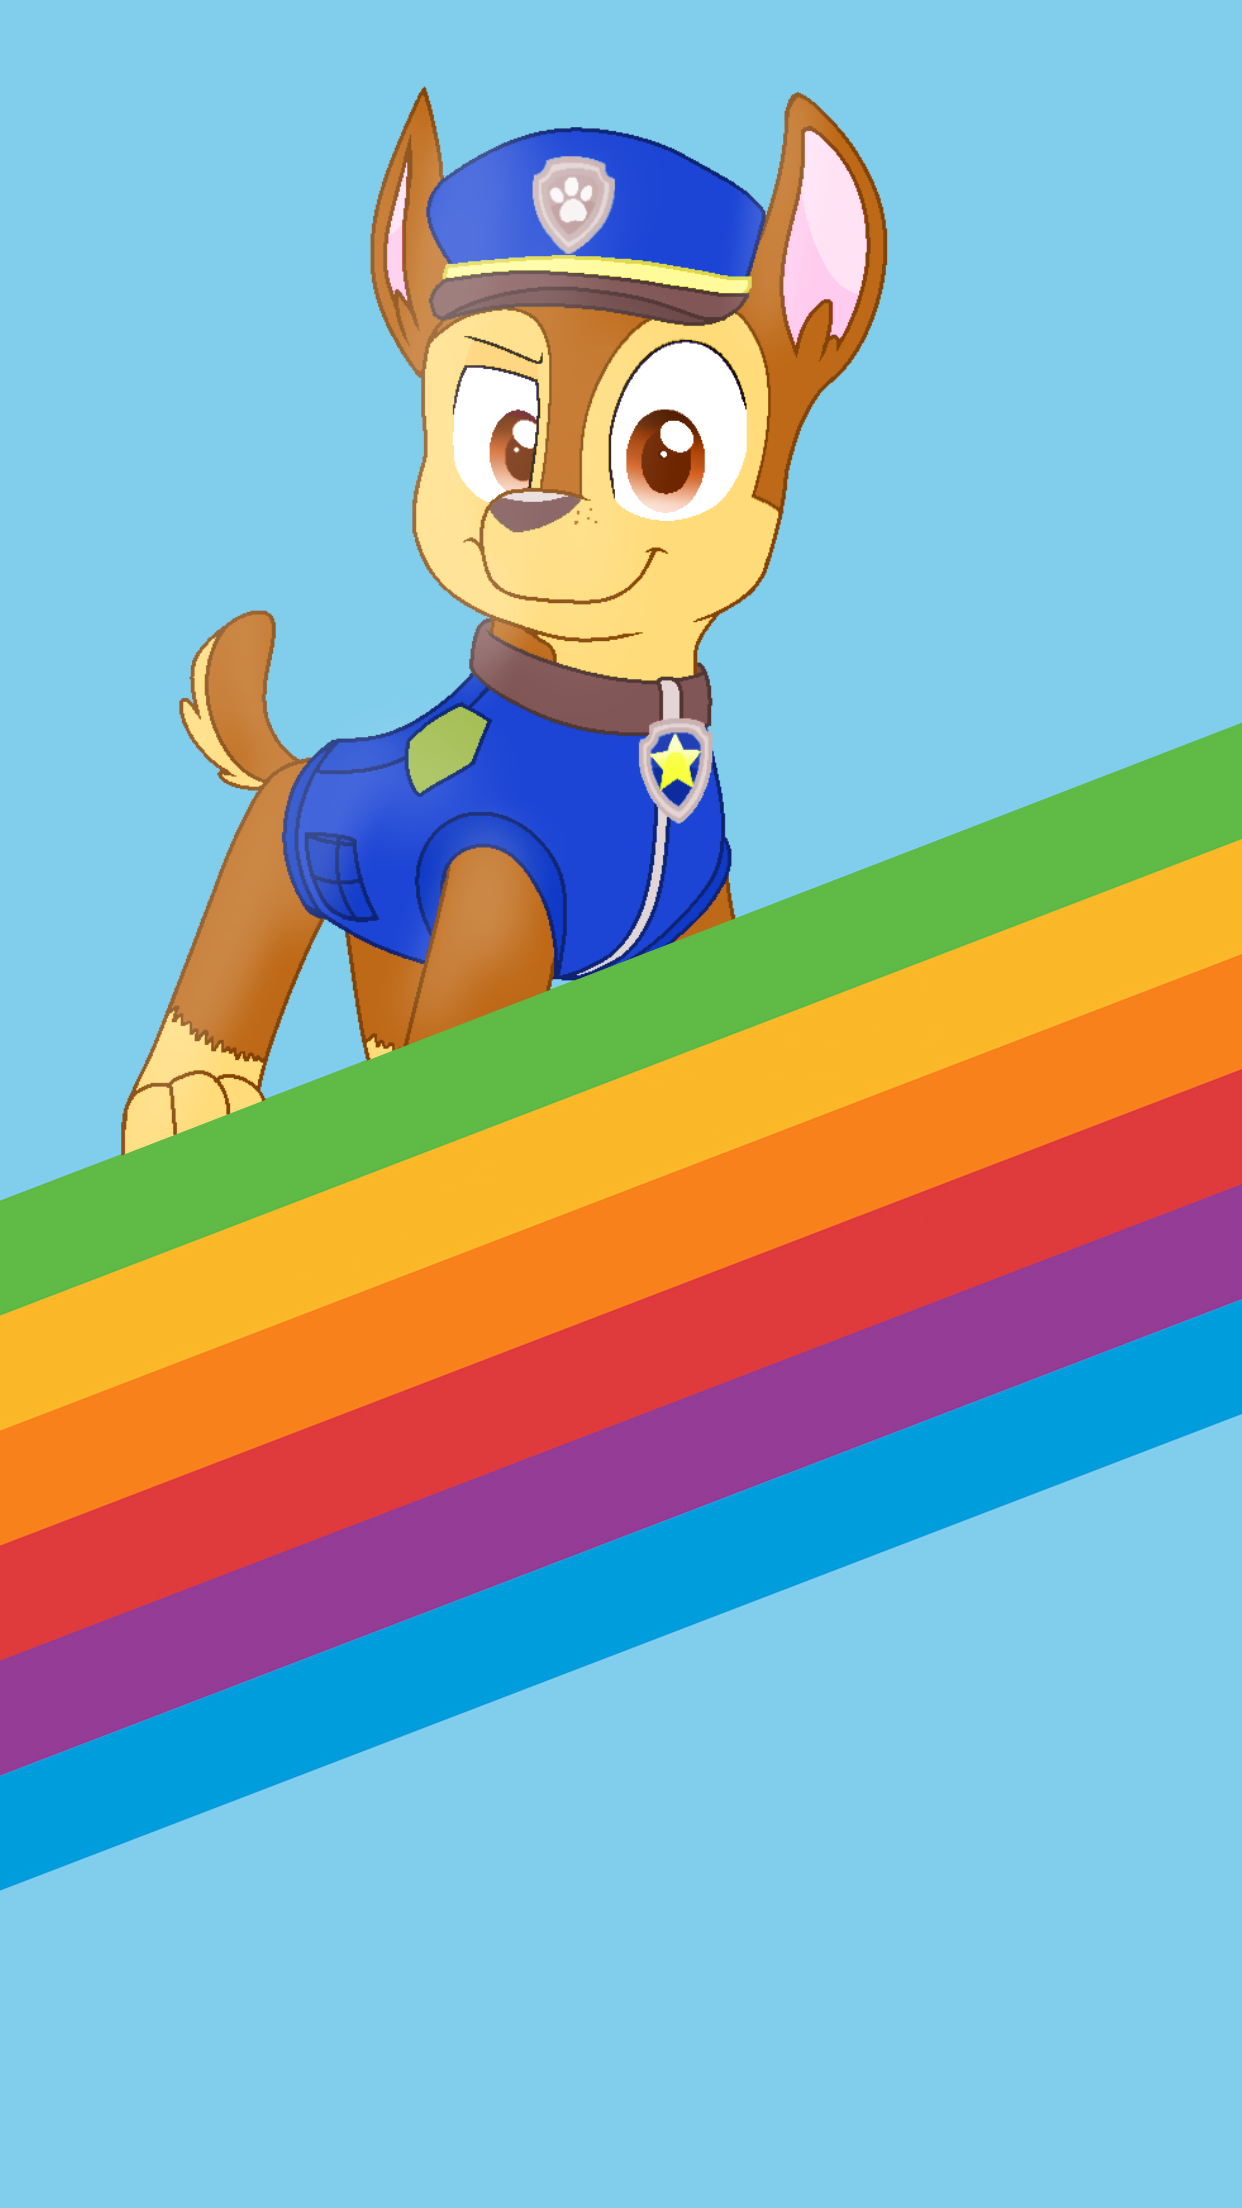 Apple iPhone Wallpaper: Chase Rainbow Stripe. Paw patrol characters, Chase paw patrol, Paw